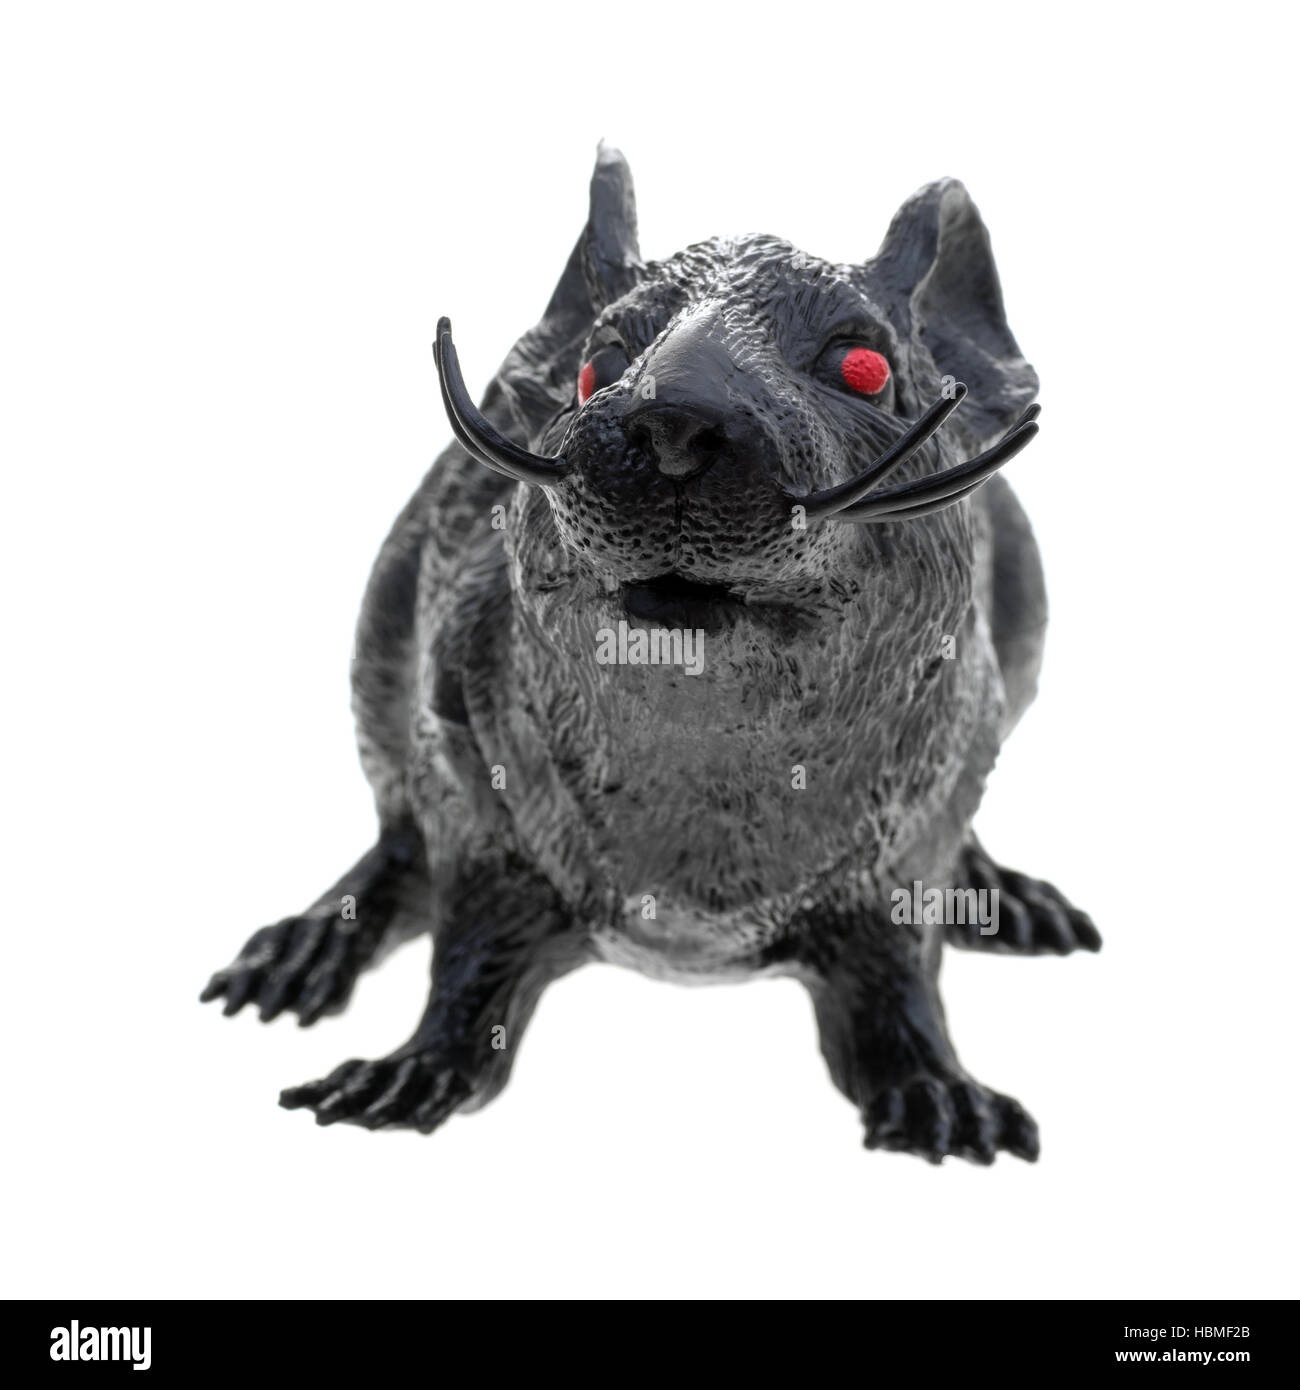 A toy plastic black rat front view with red eyes isolated on a white background. Stock Photo